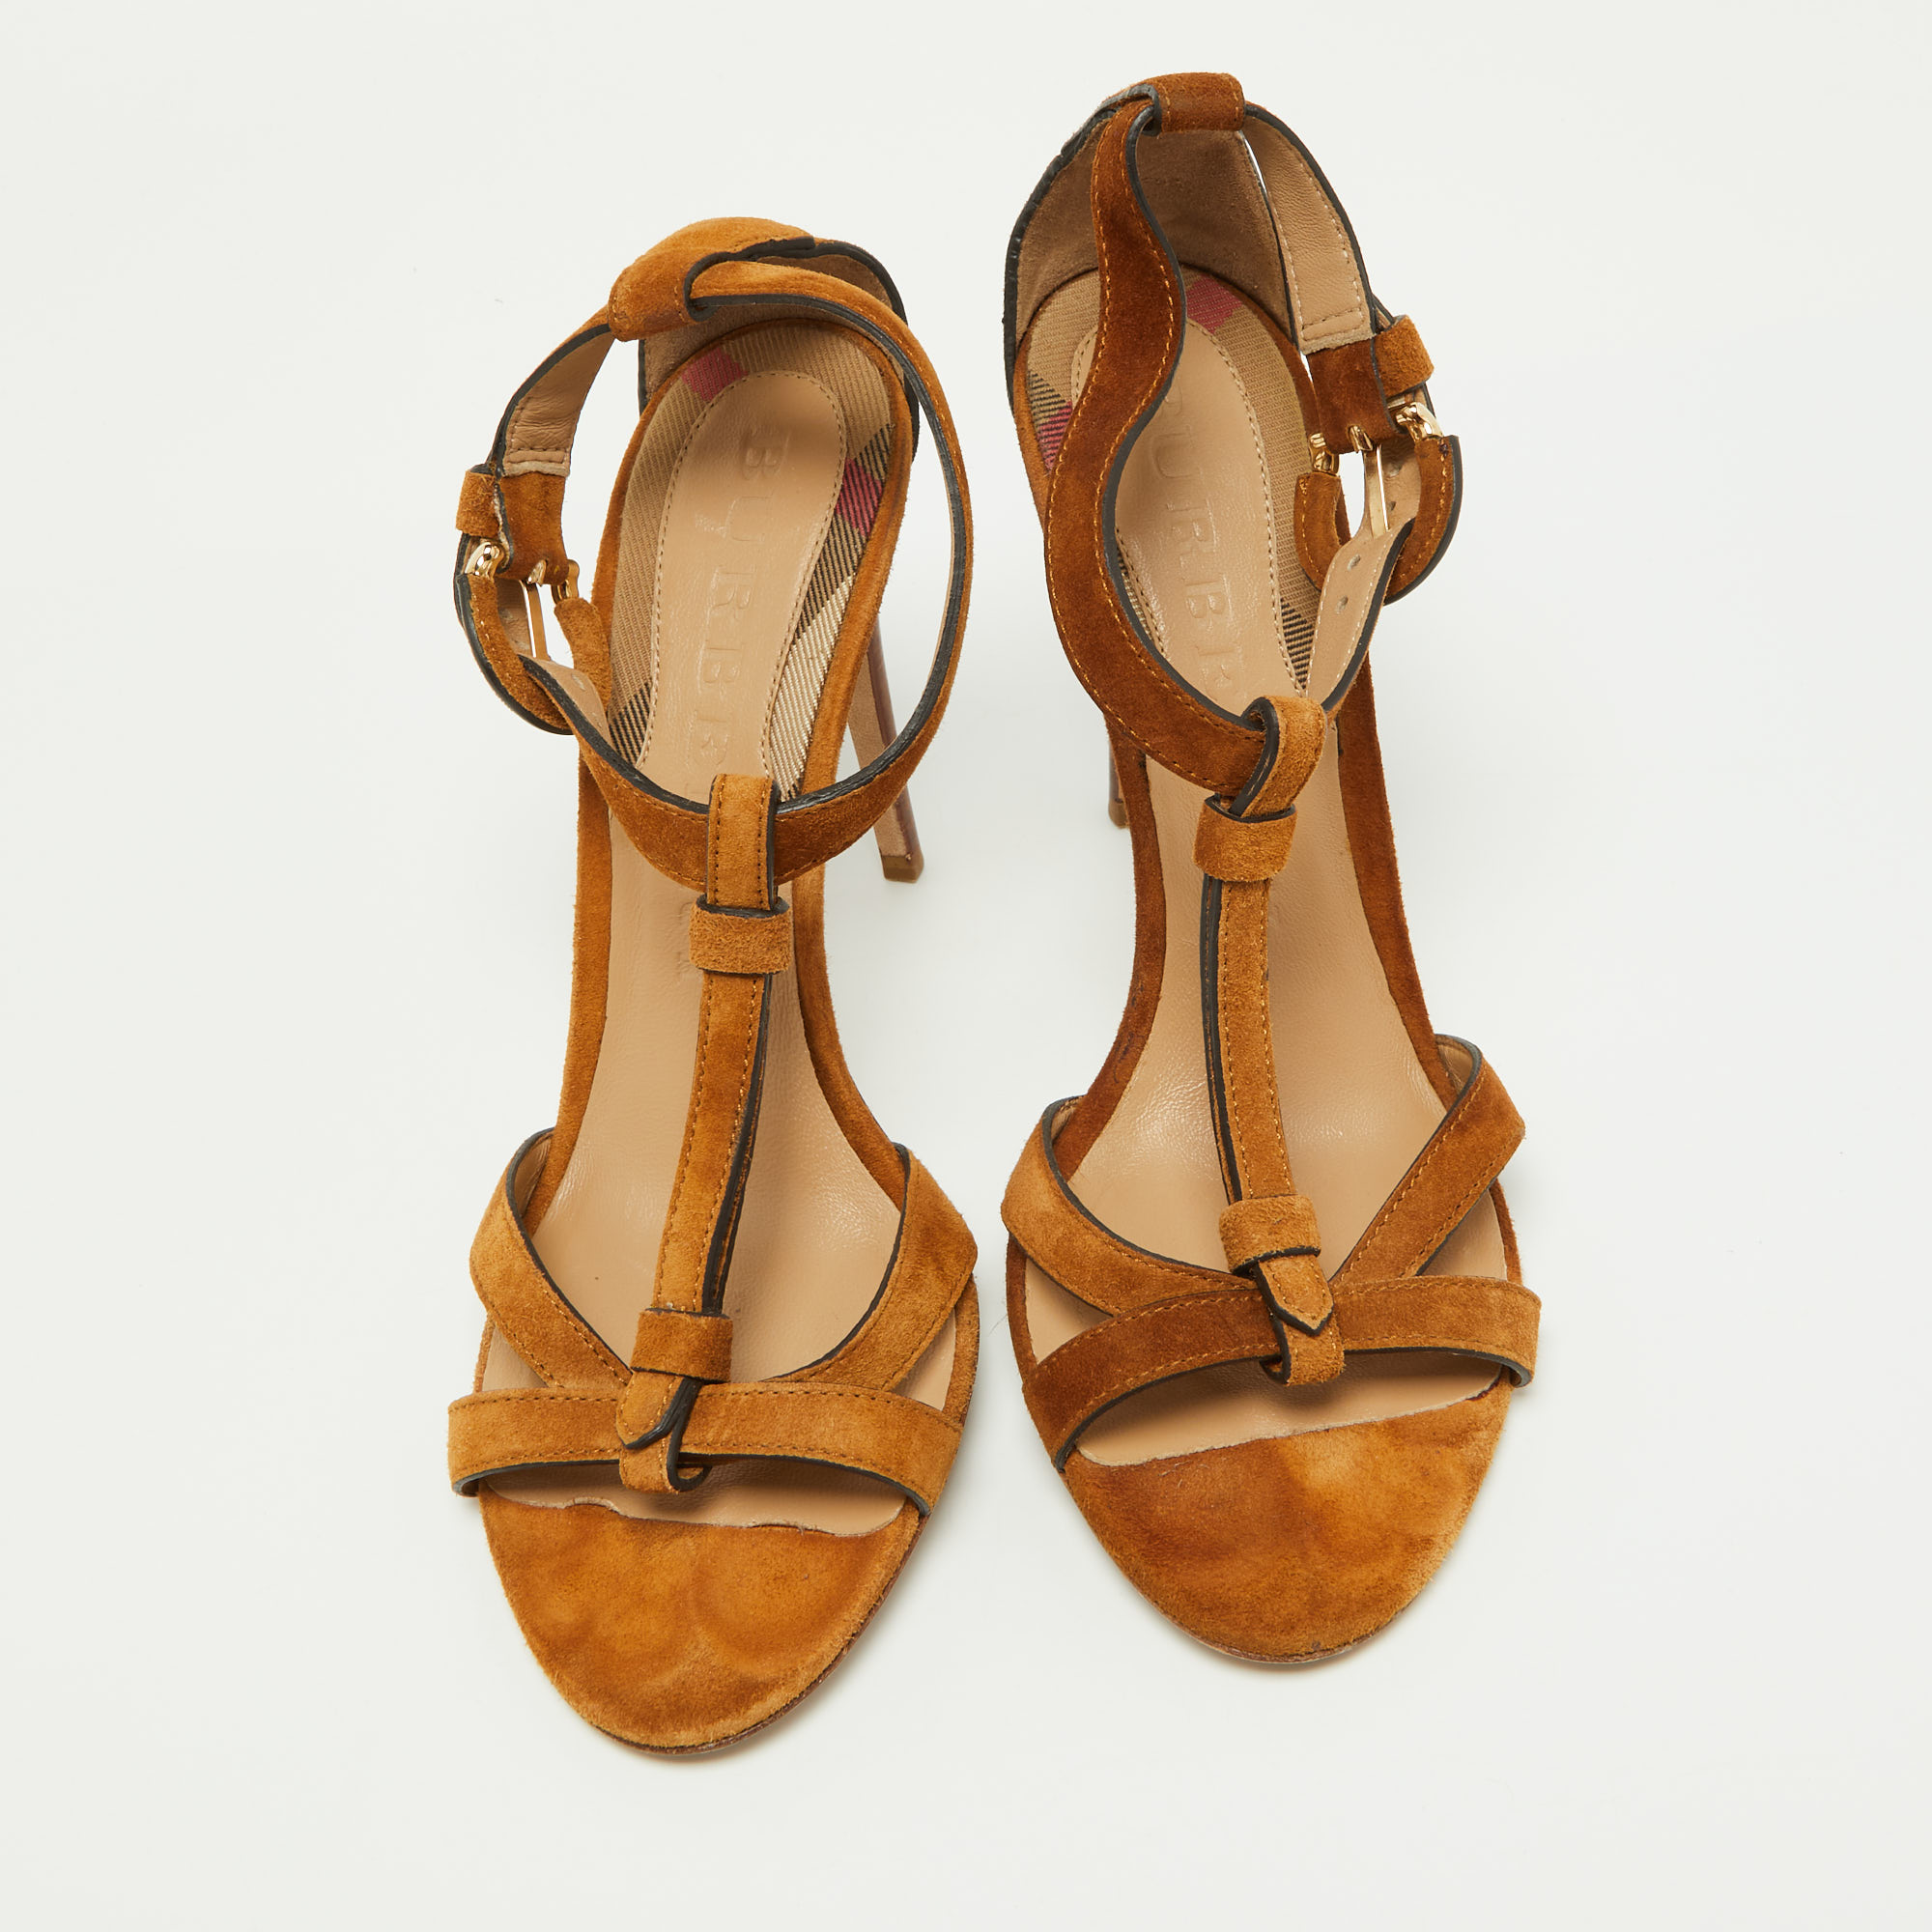 Burberry Brown Suede Ankle Strap Sandals Size 39